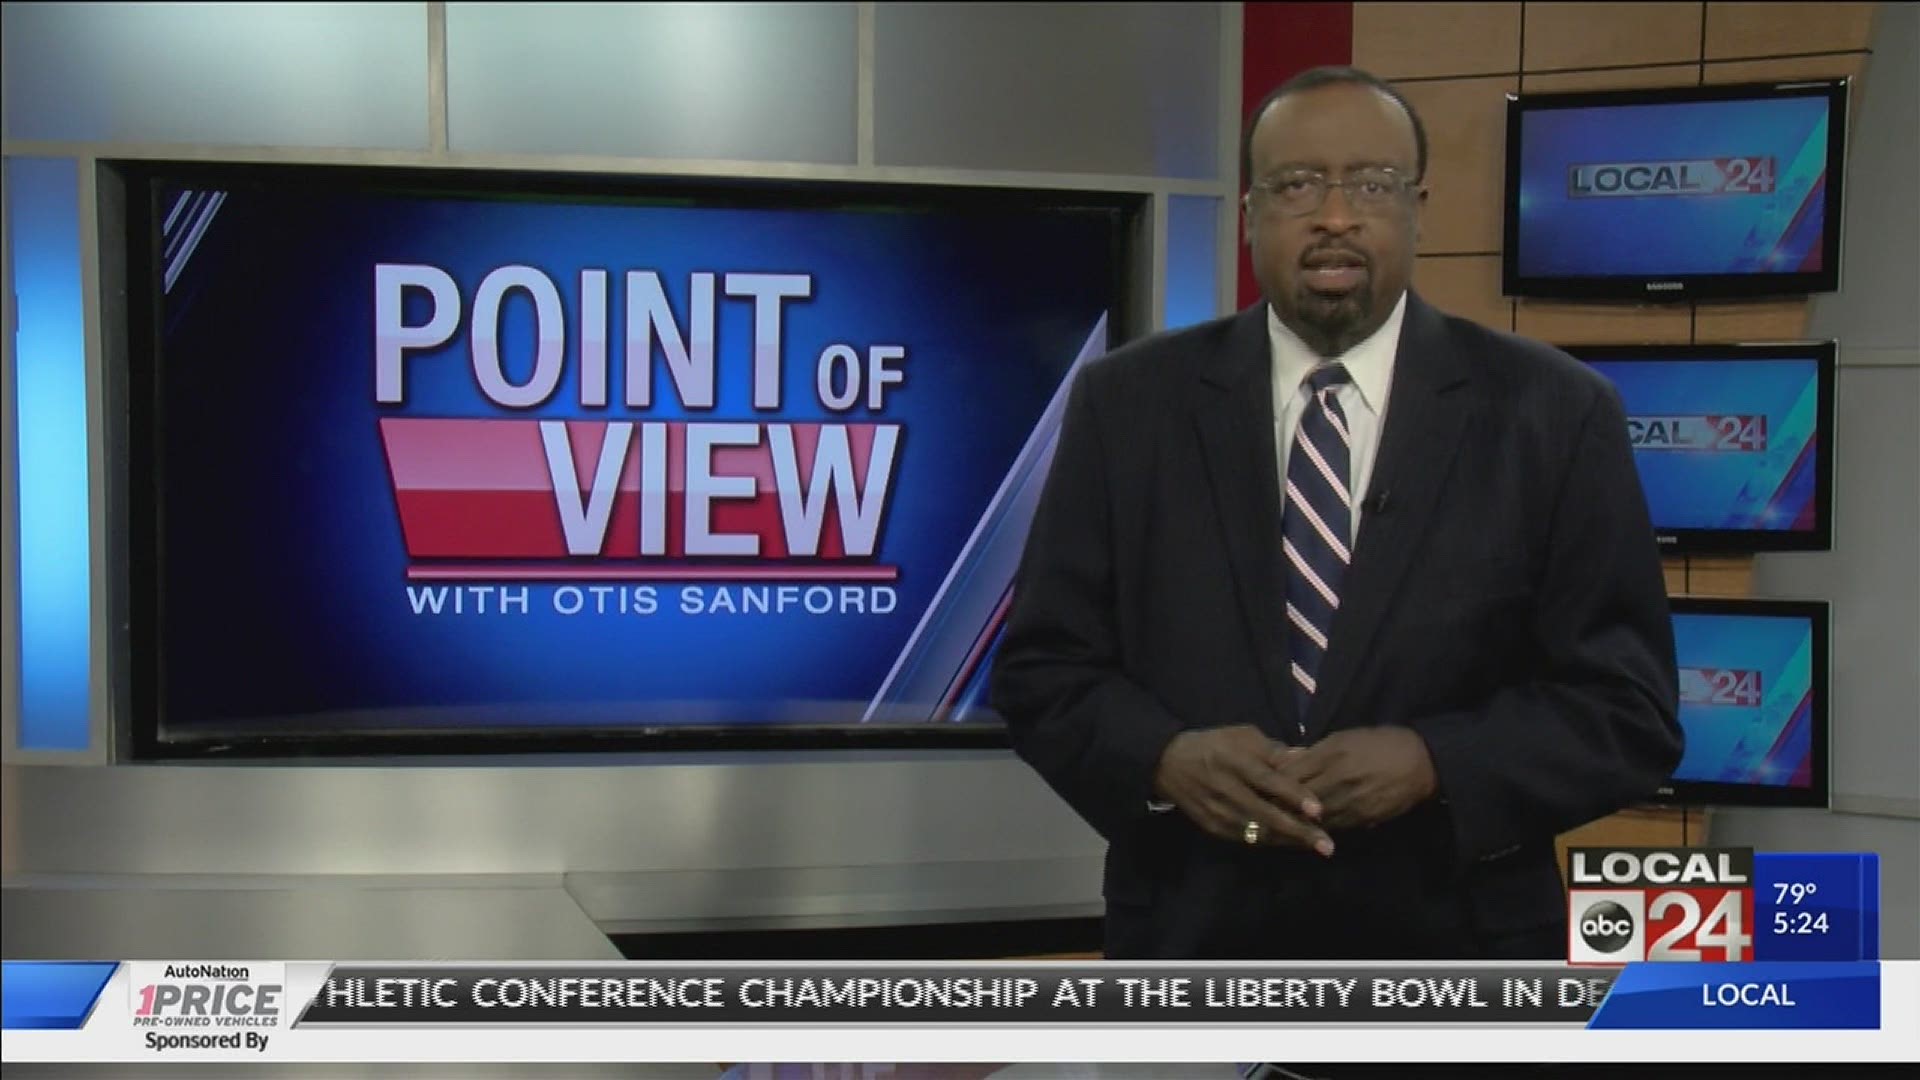 Local 24 News political analyst and commentator Otis Sanford shares his point of view on visitation at long-term care facilities amid COVID-19.